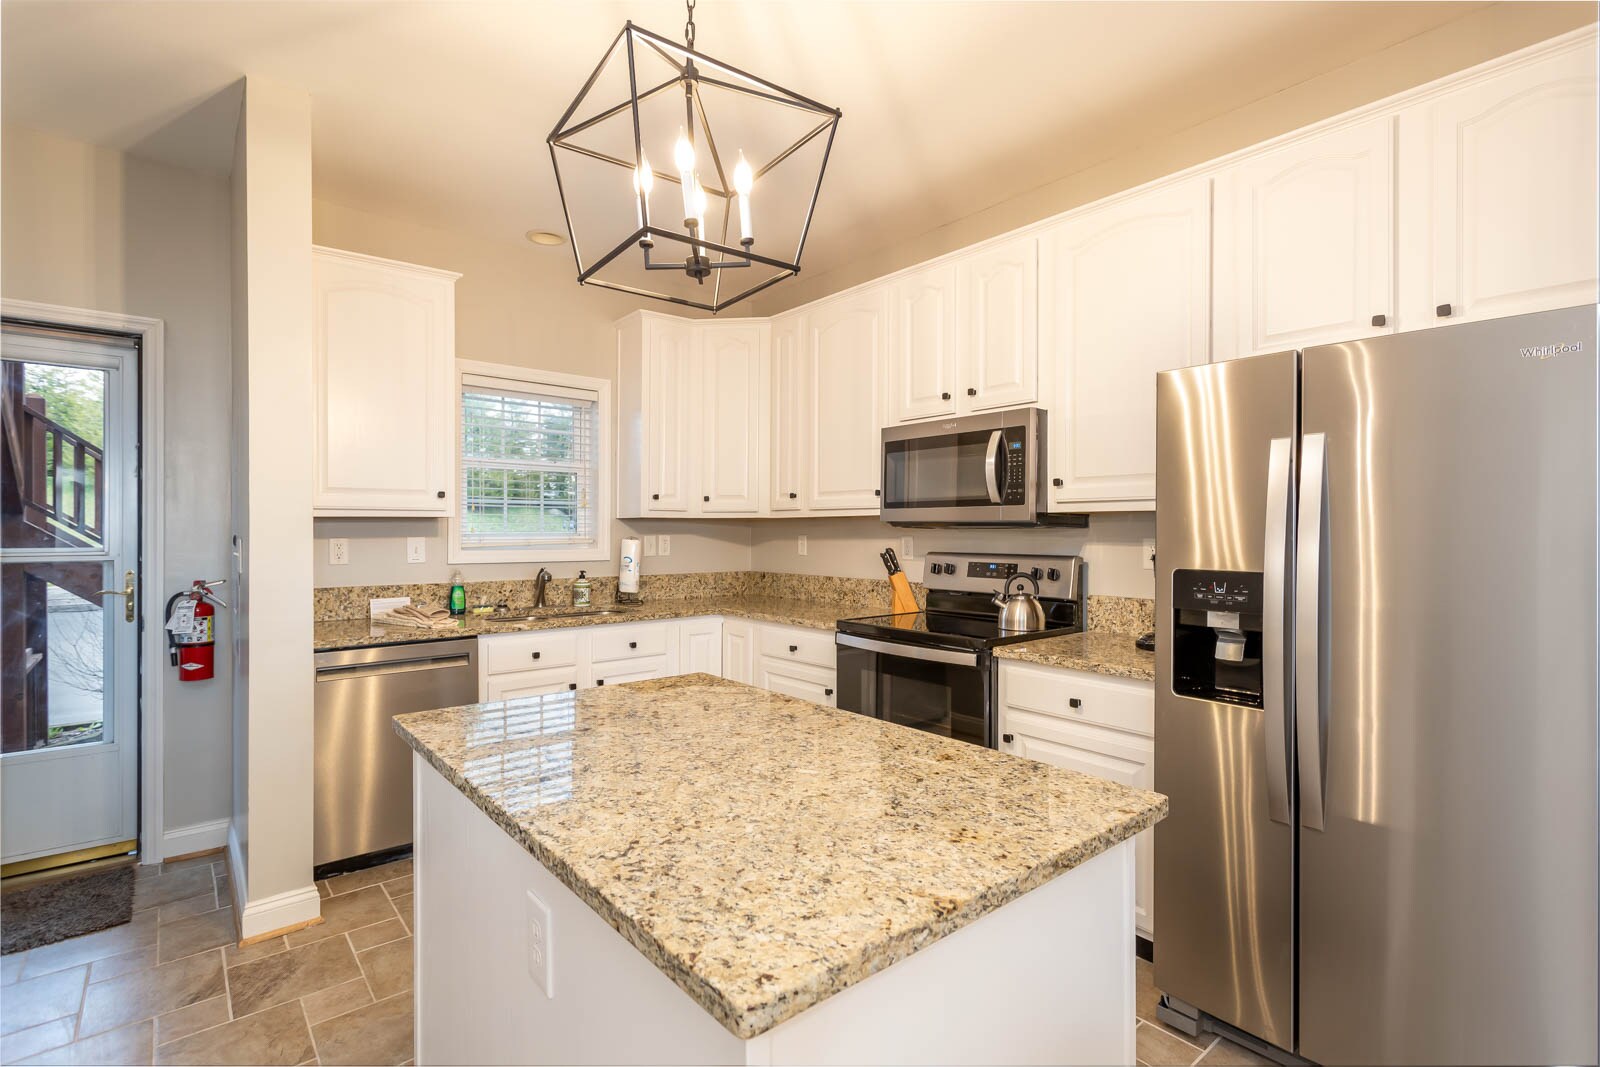 Granite Counter Tops, Kitchen Island and Stainless Appliances